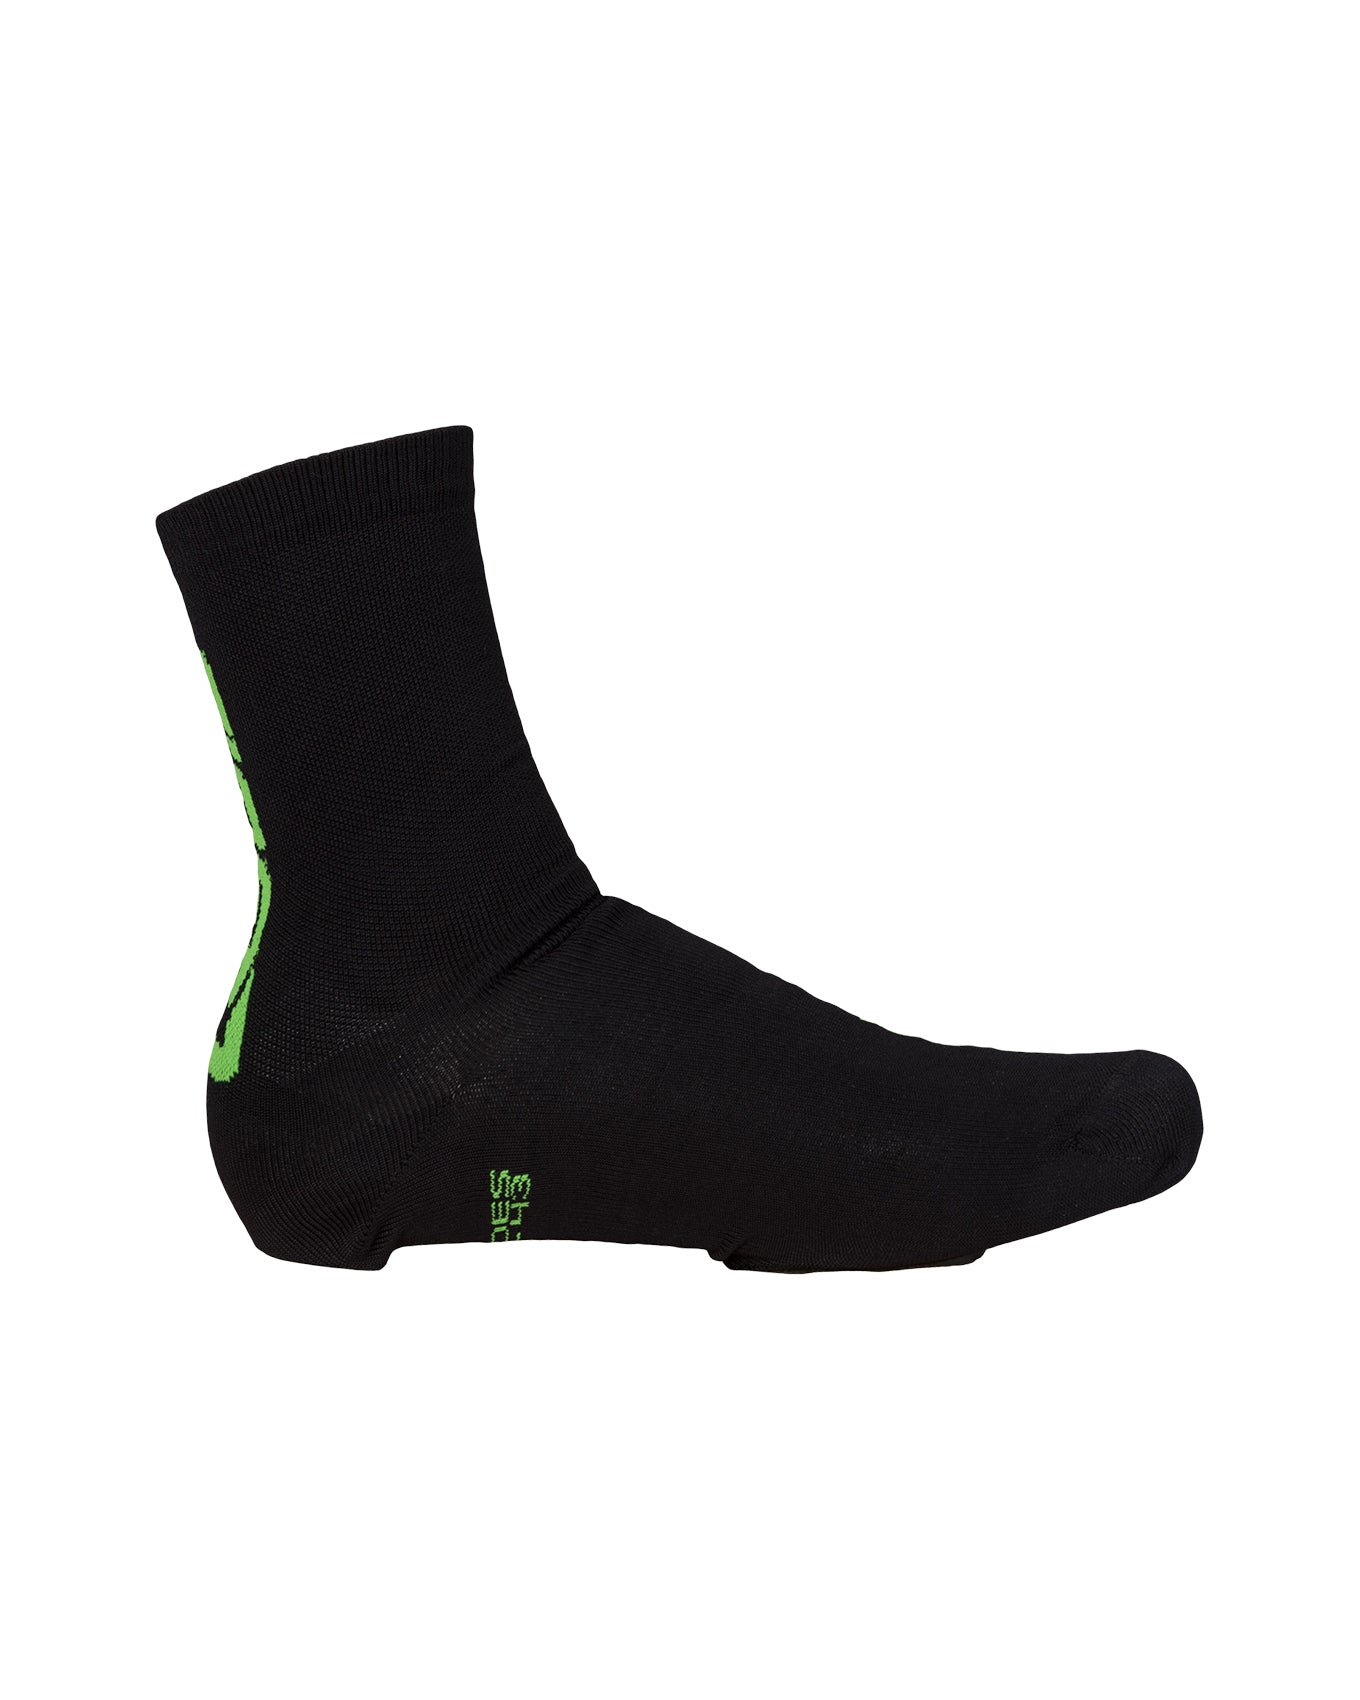 Mens cycling socks and overshoes • Q36.5